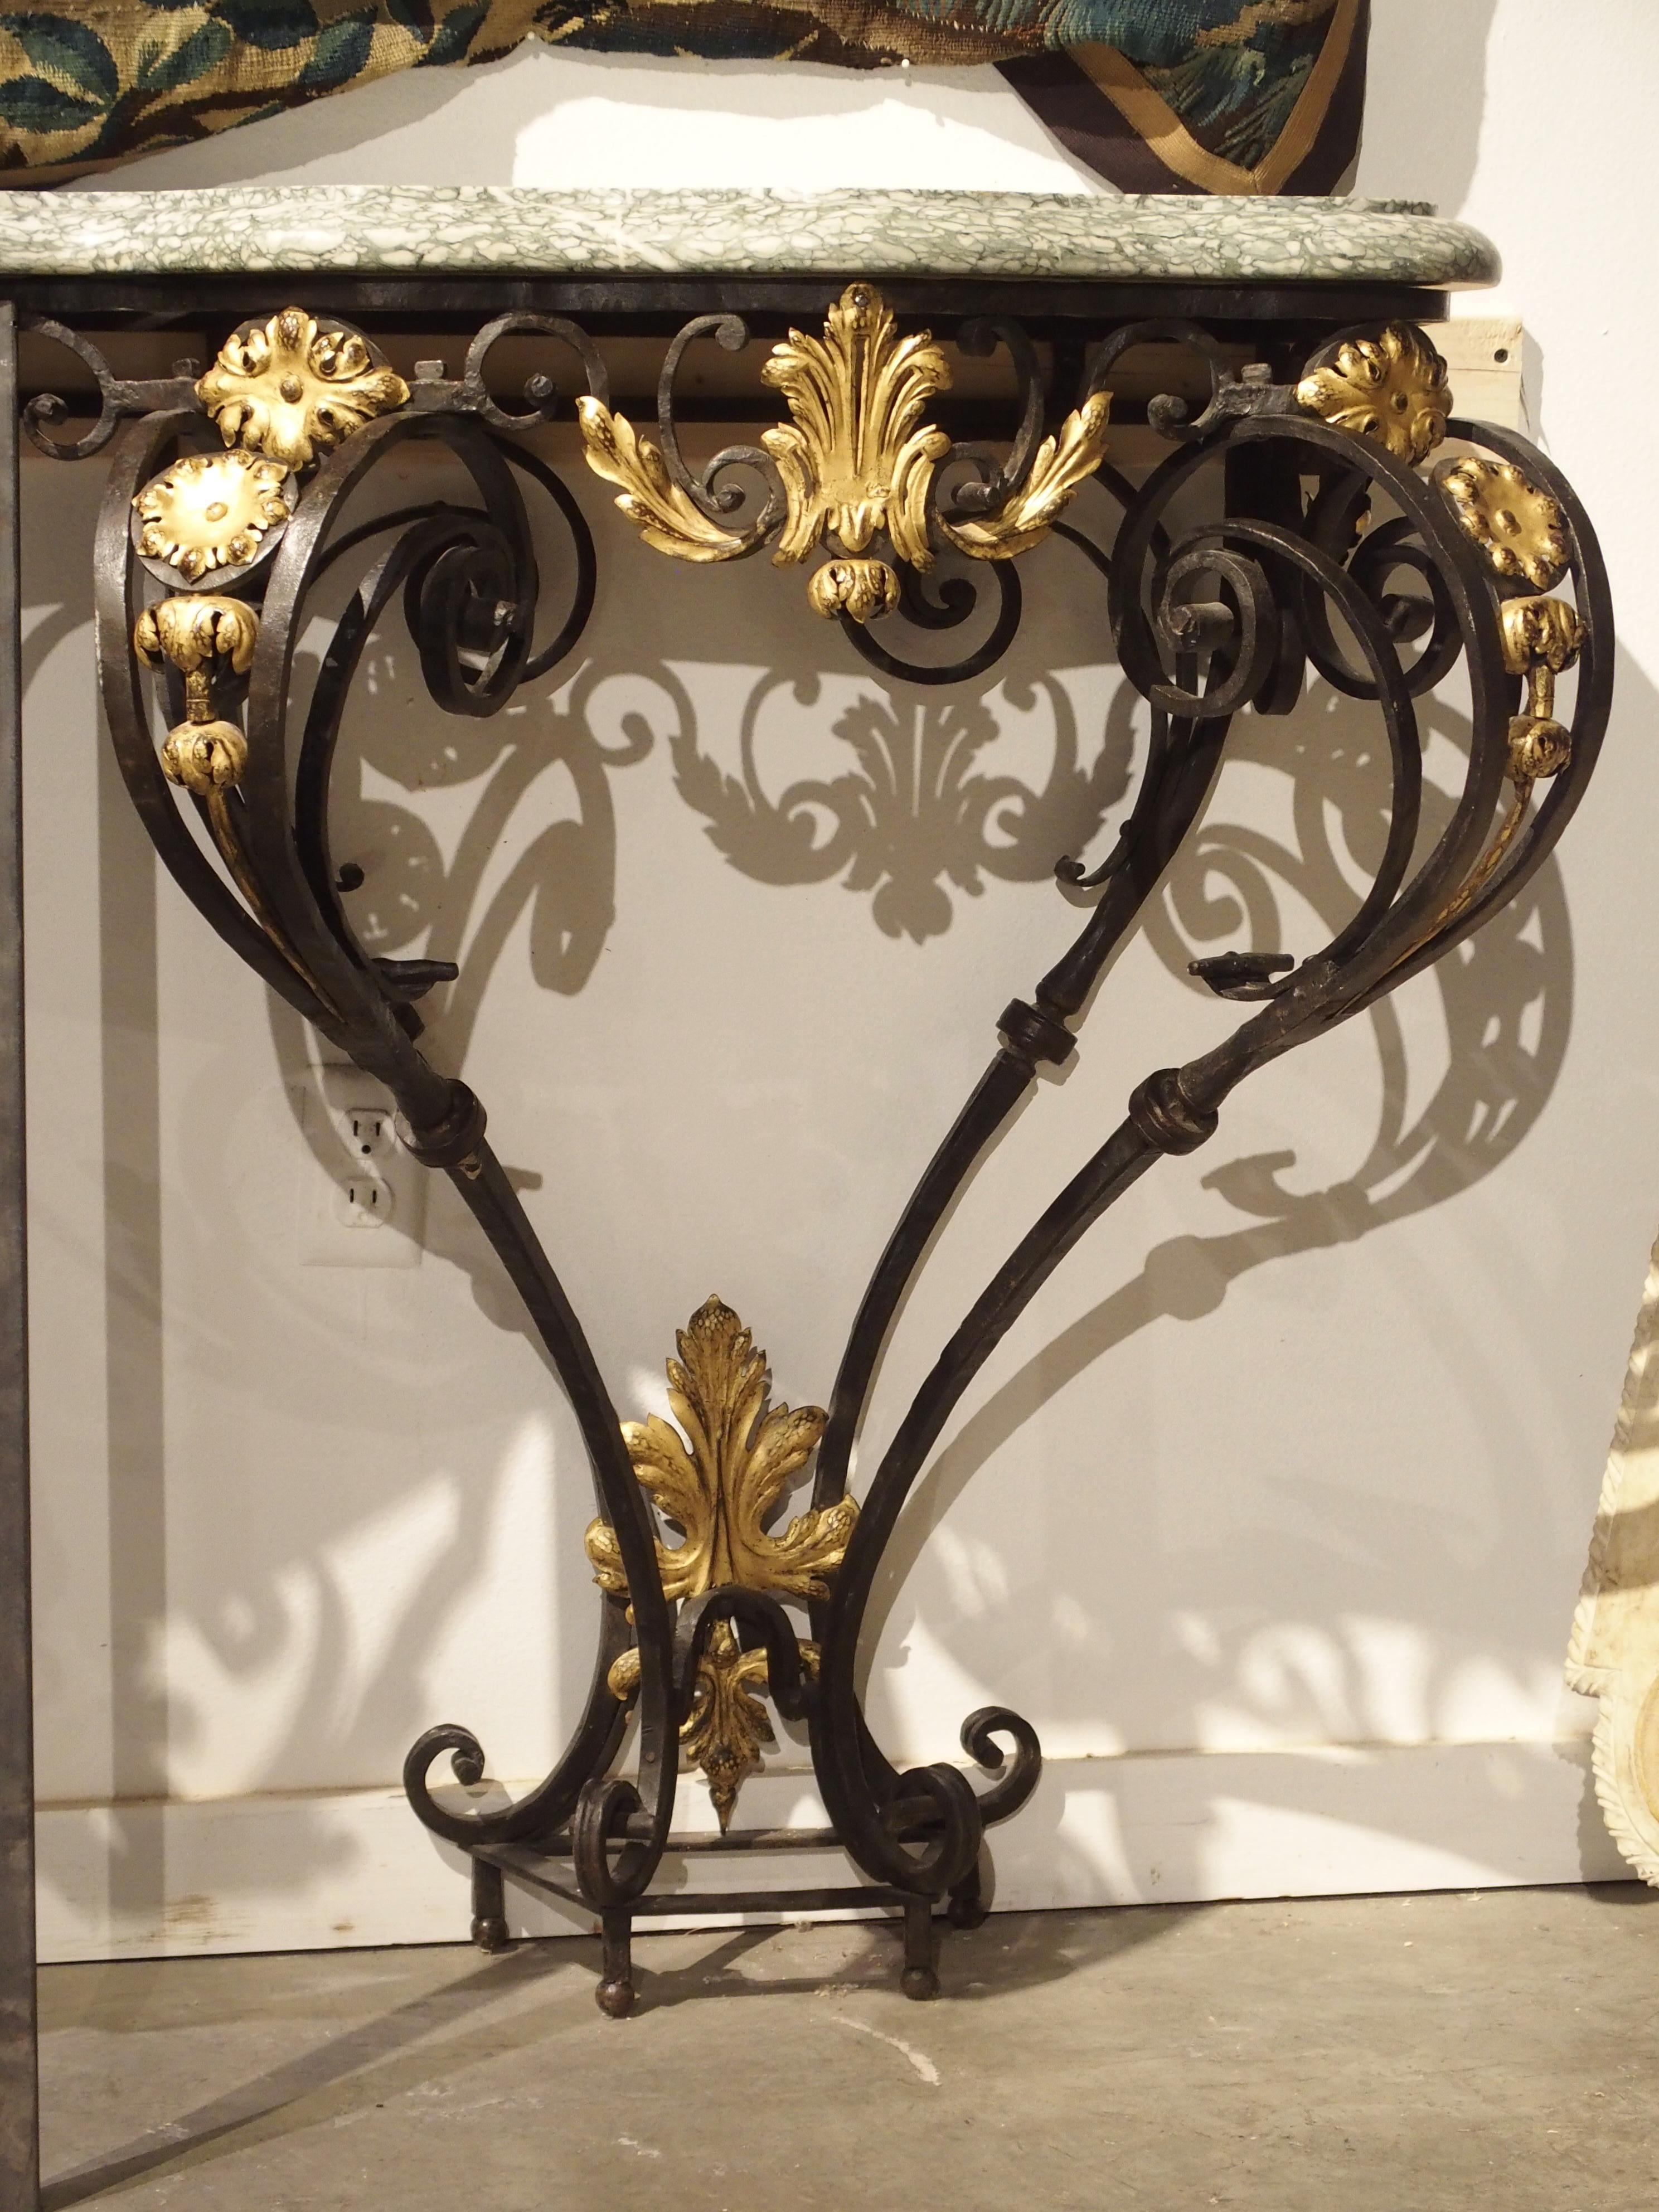 Vertical bars in front of console are temporary display supports due to back wall instability (not part of console table)

From France, this magnificent hand wrought iron, marble and gilt tole console table was made in Provence, circa 1850. The